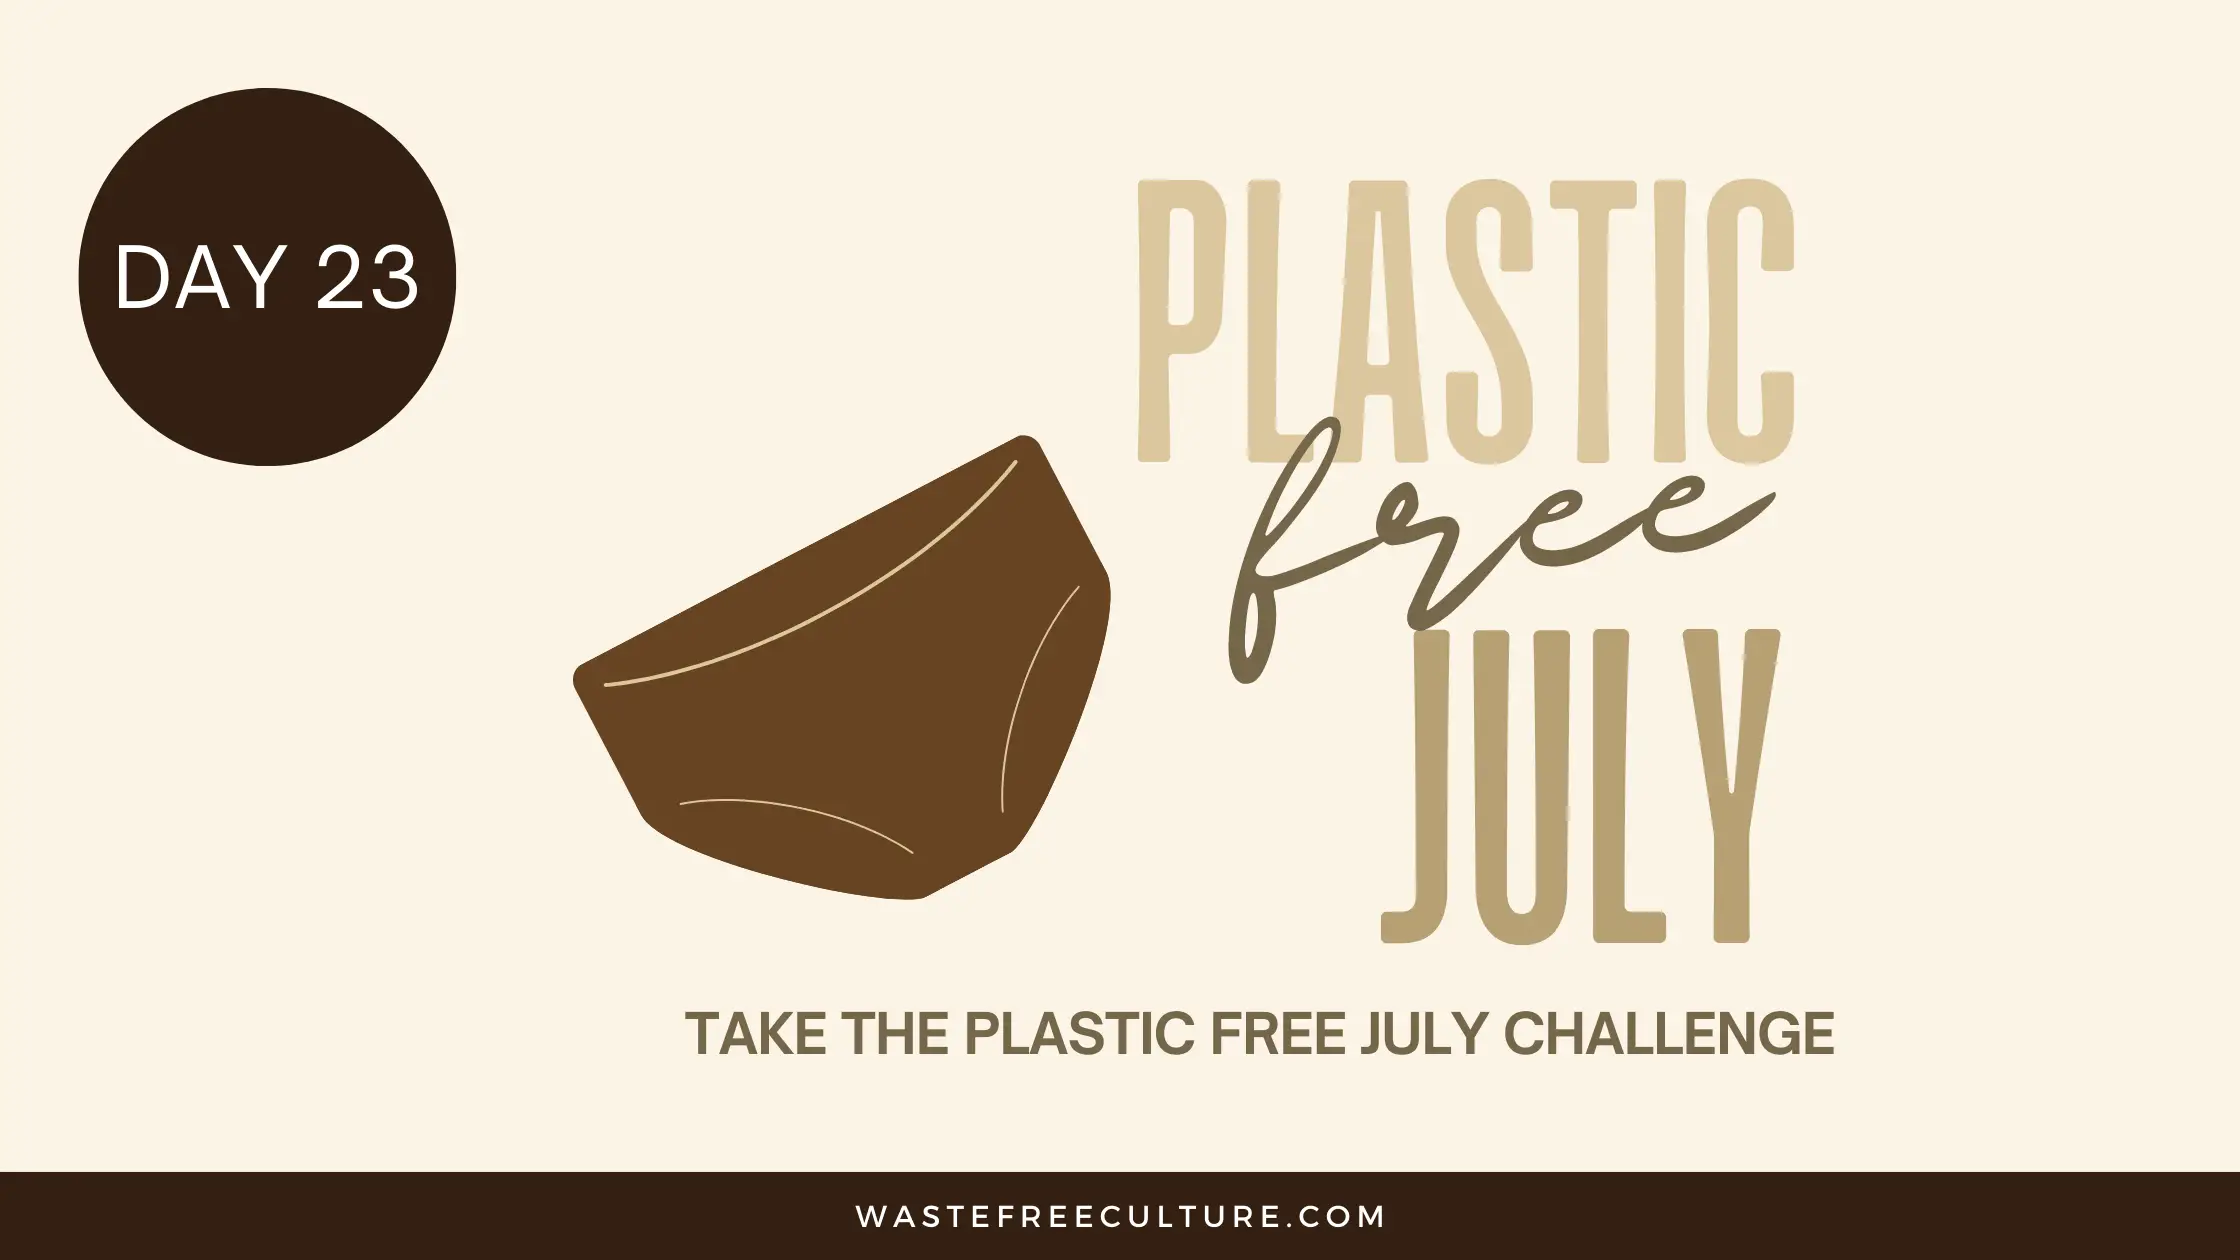 Day 23 of the Plastic Free July Challenge